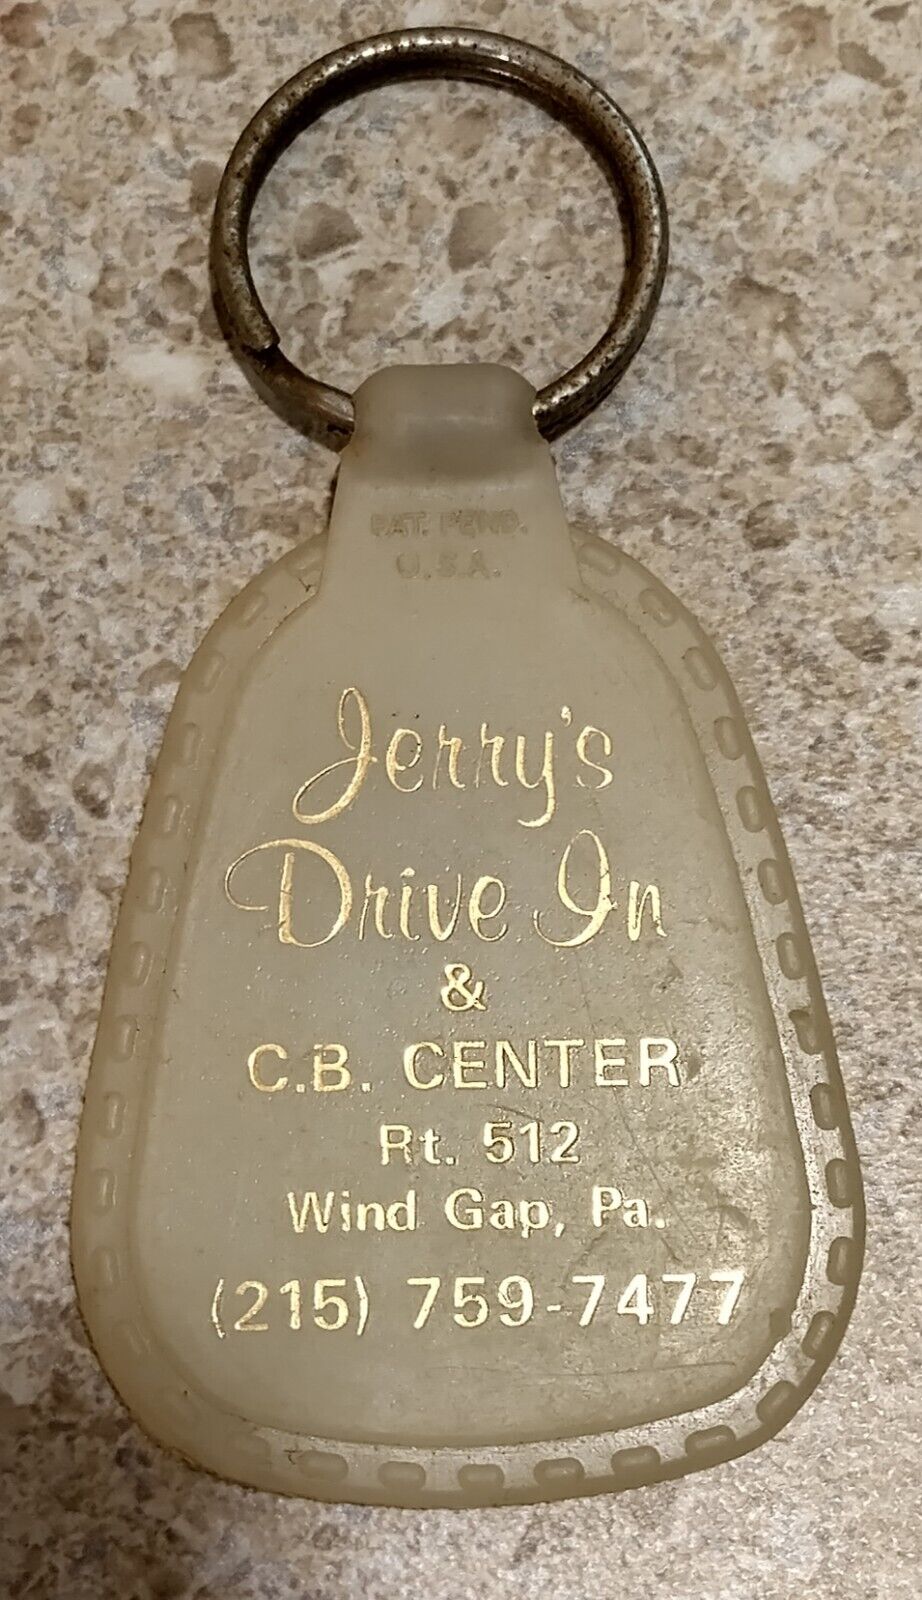 Vintage JERRY'S DRIVE-IN & C.B. CENTER Keychain 2 Sided WIND GAP PA CLOSED